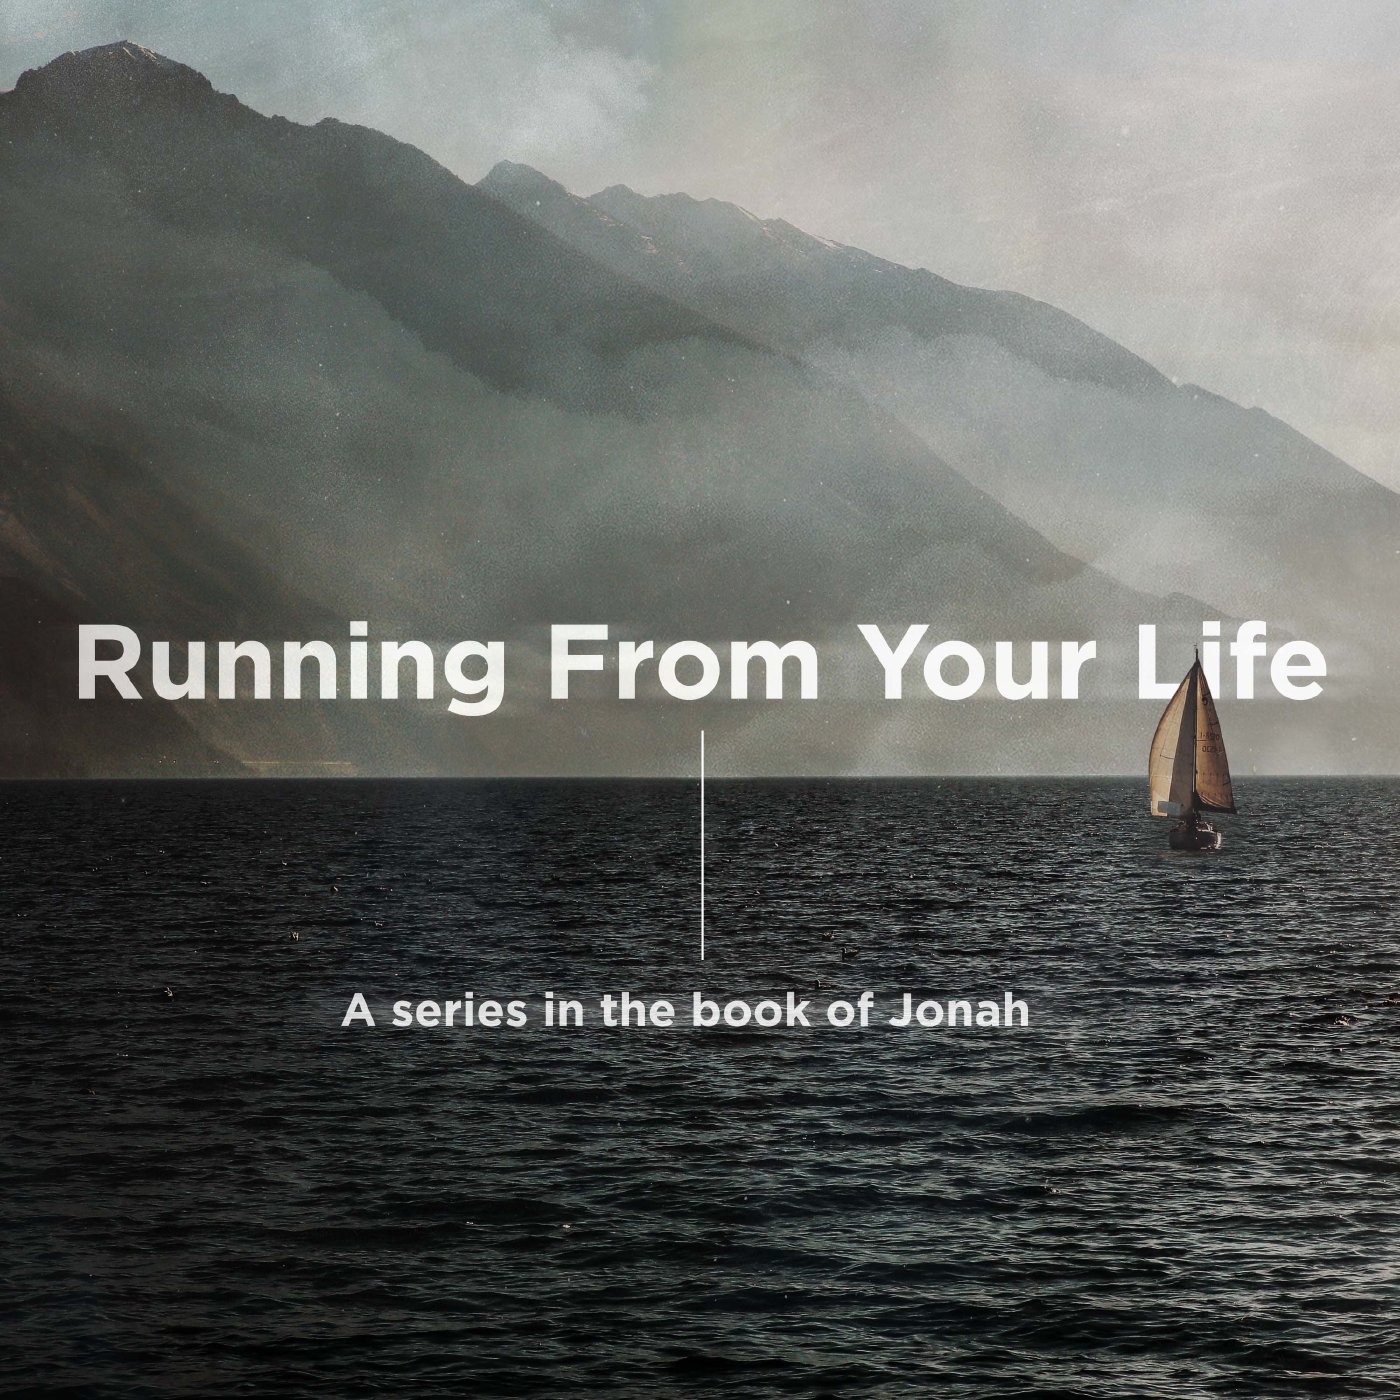 Running From Your Life | February 13th, 2022